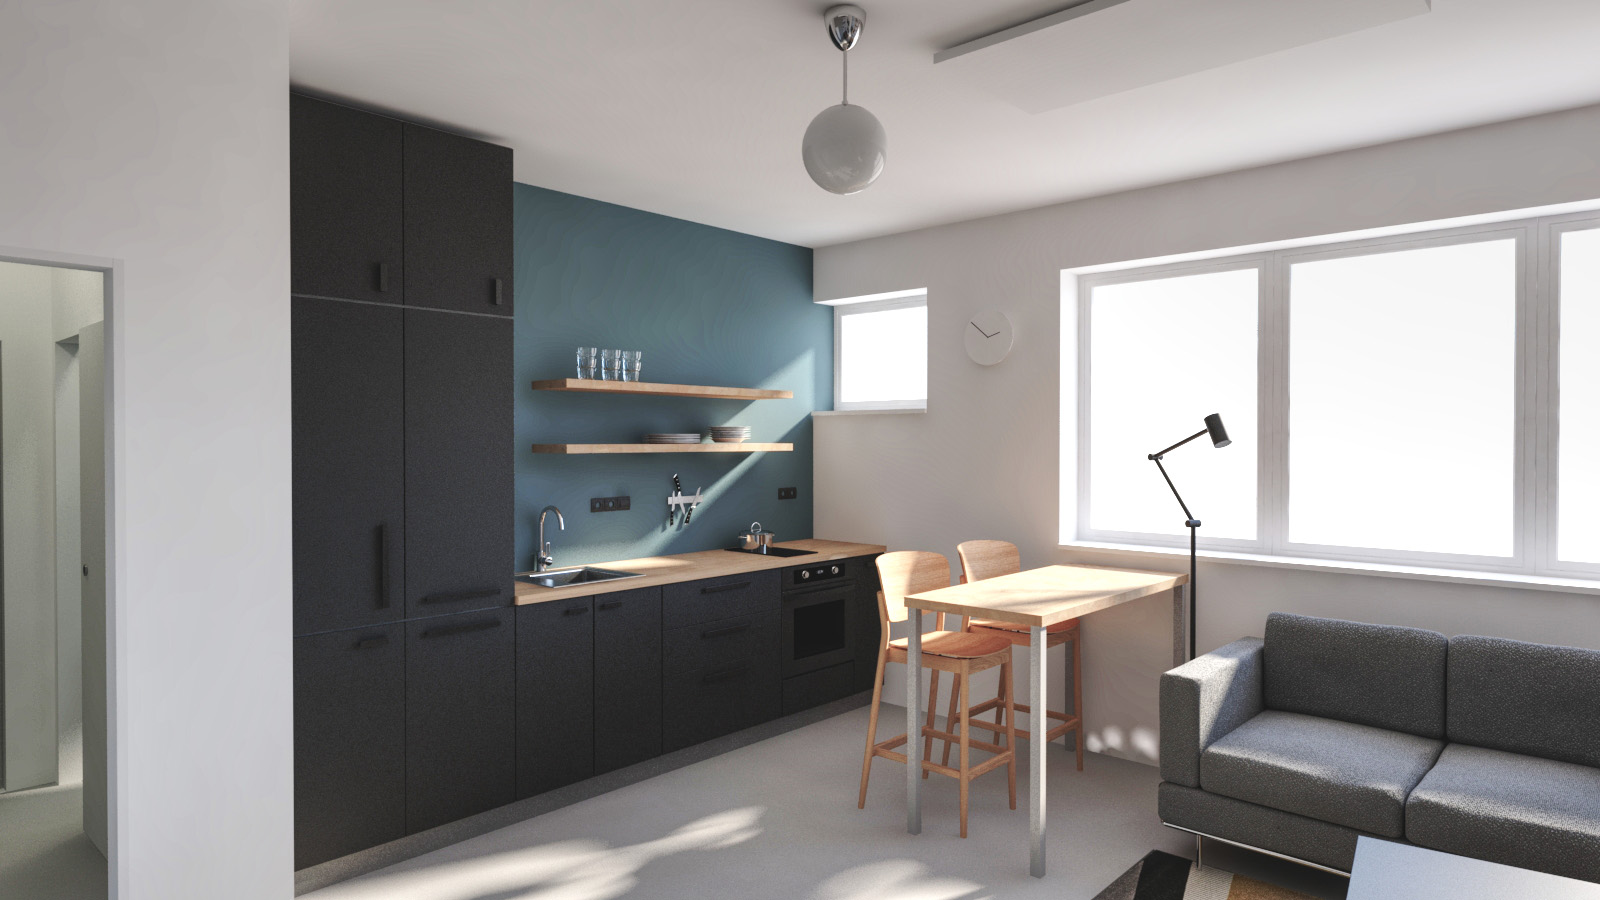 living room with black kitchen counter with wooden elements